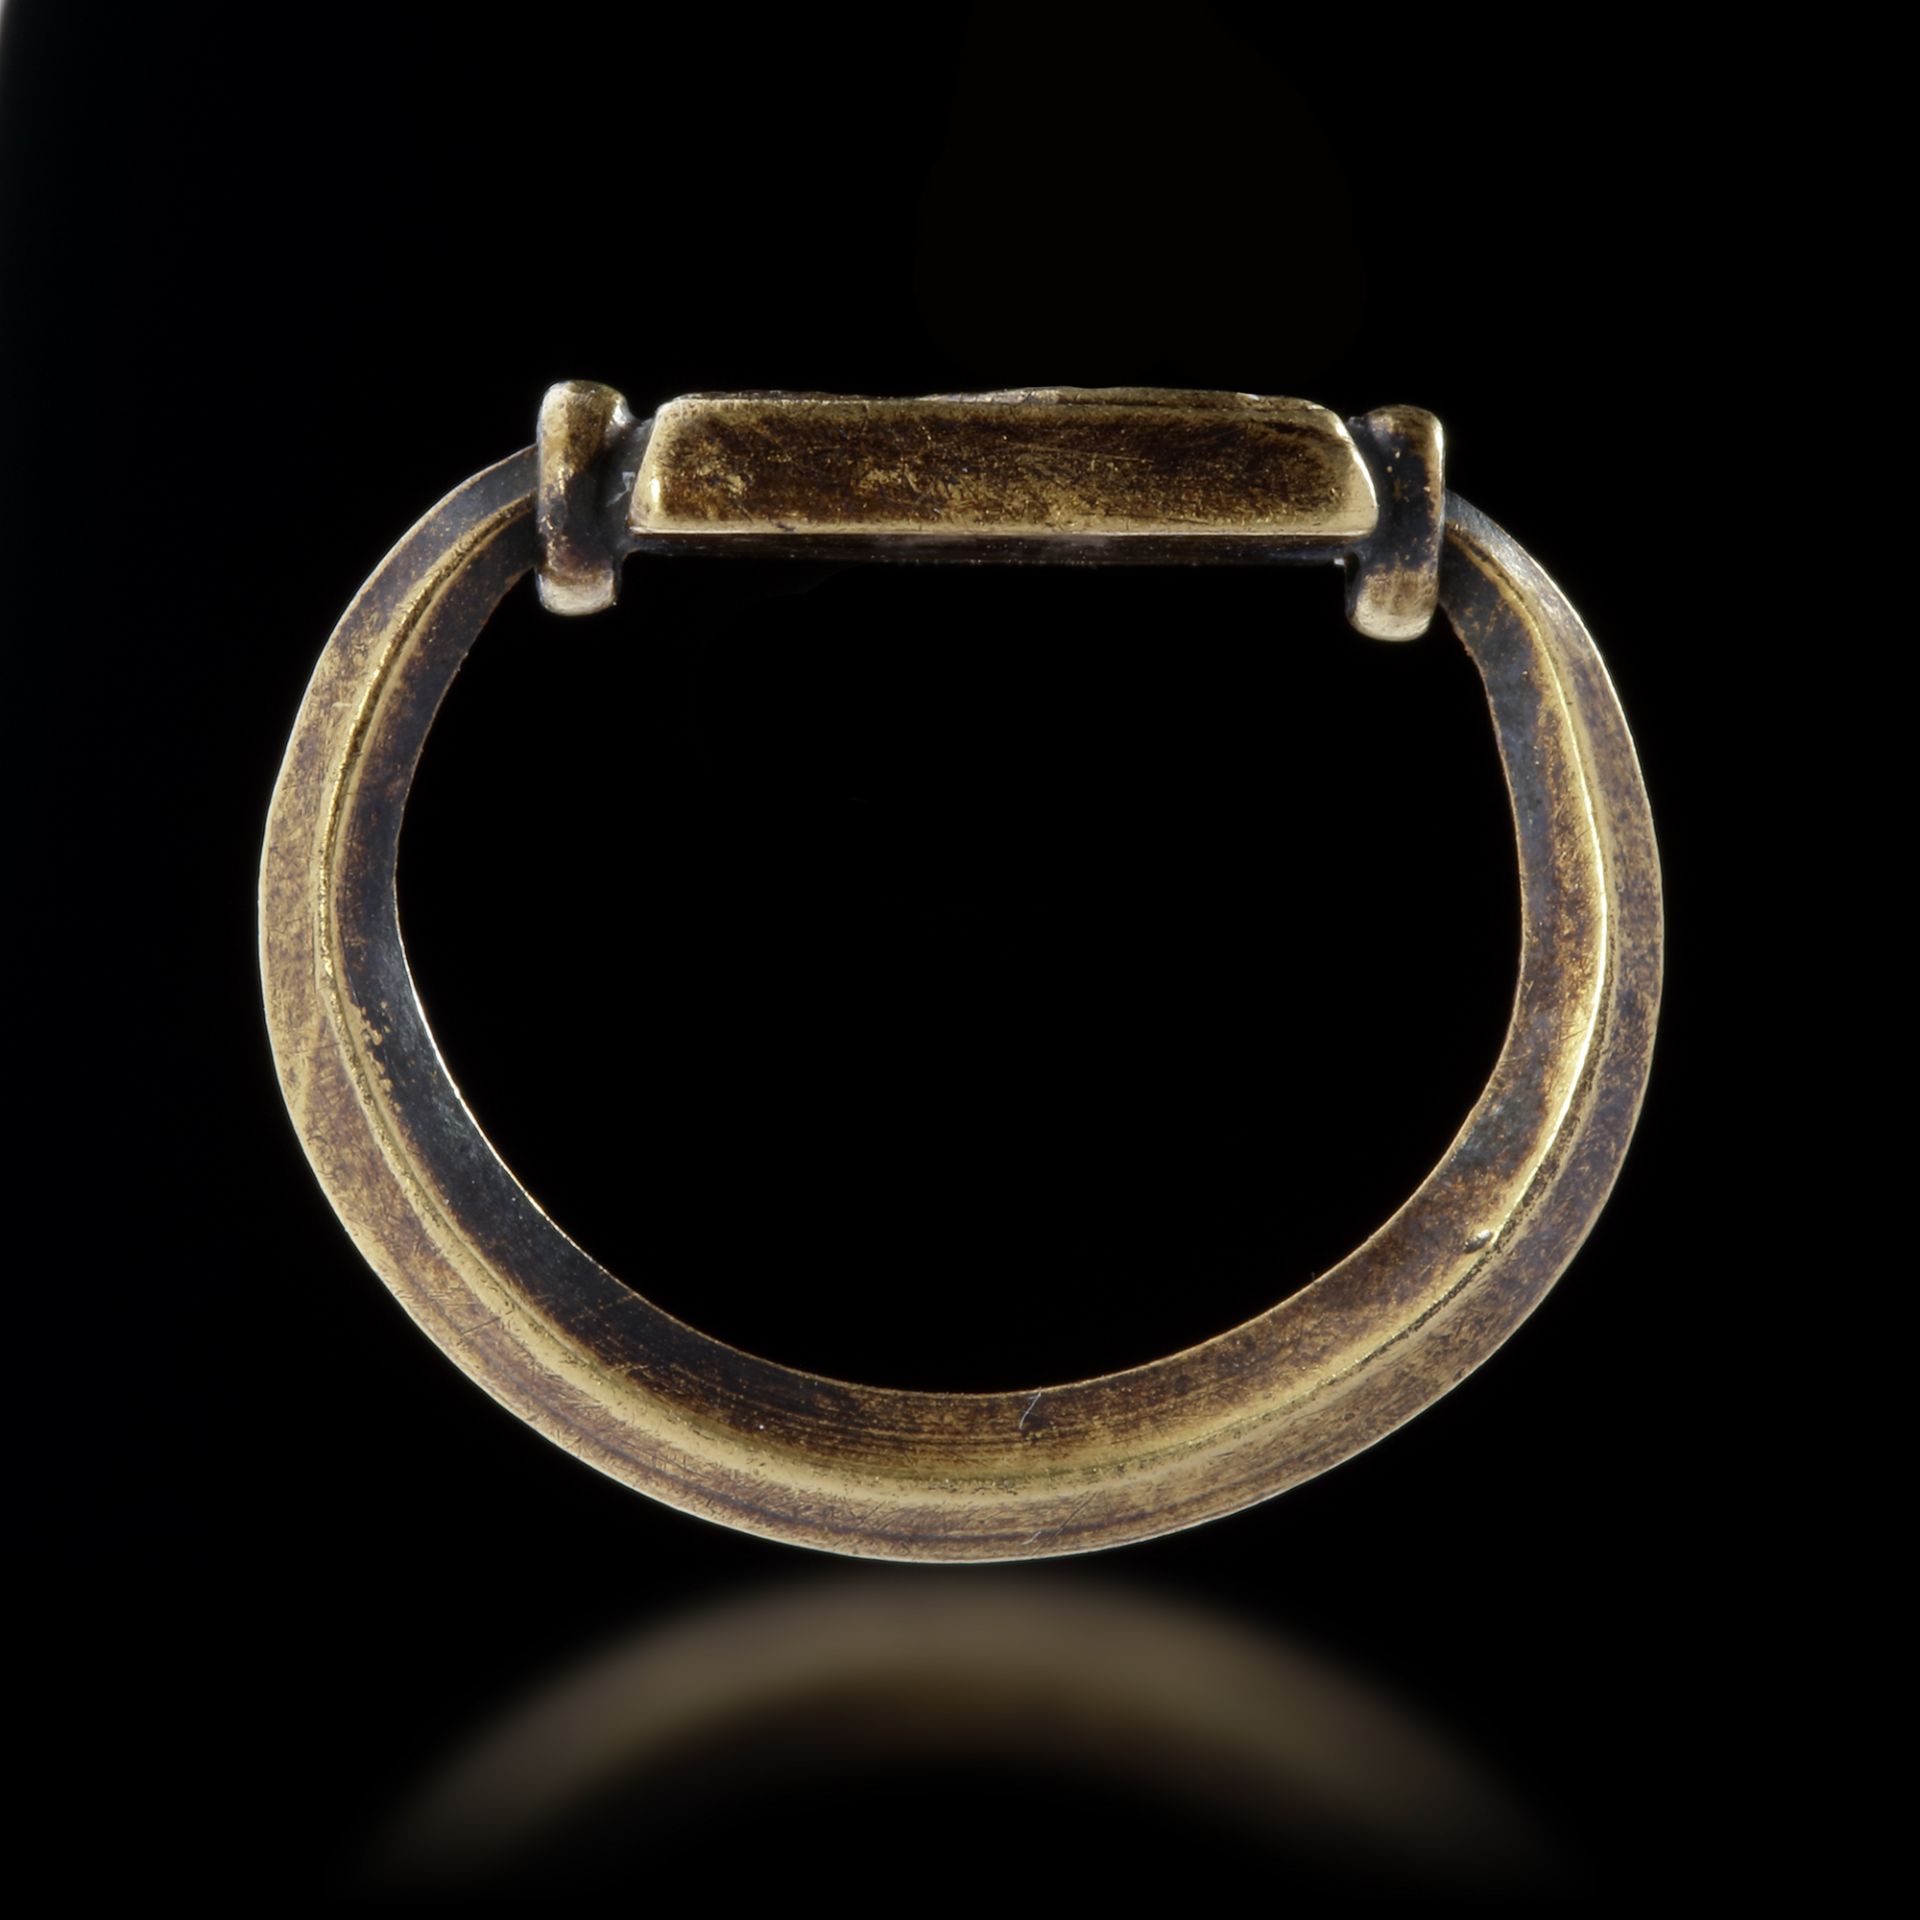 A PHOENICIAN RING IN GOLD WITH AN EYE OF HORUS, 6TH-7TH CENTURY CENTURY BC - Image 2 of 4